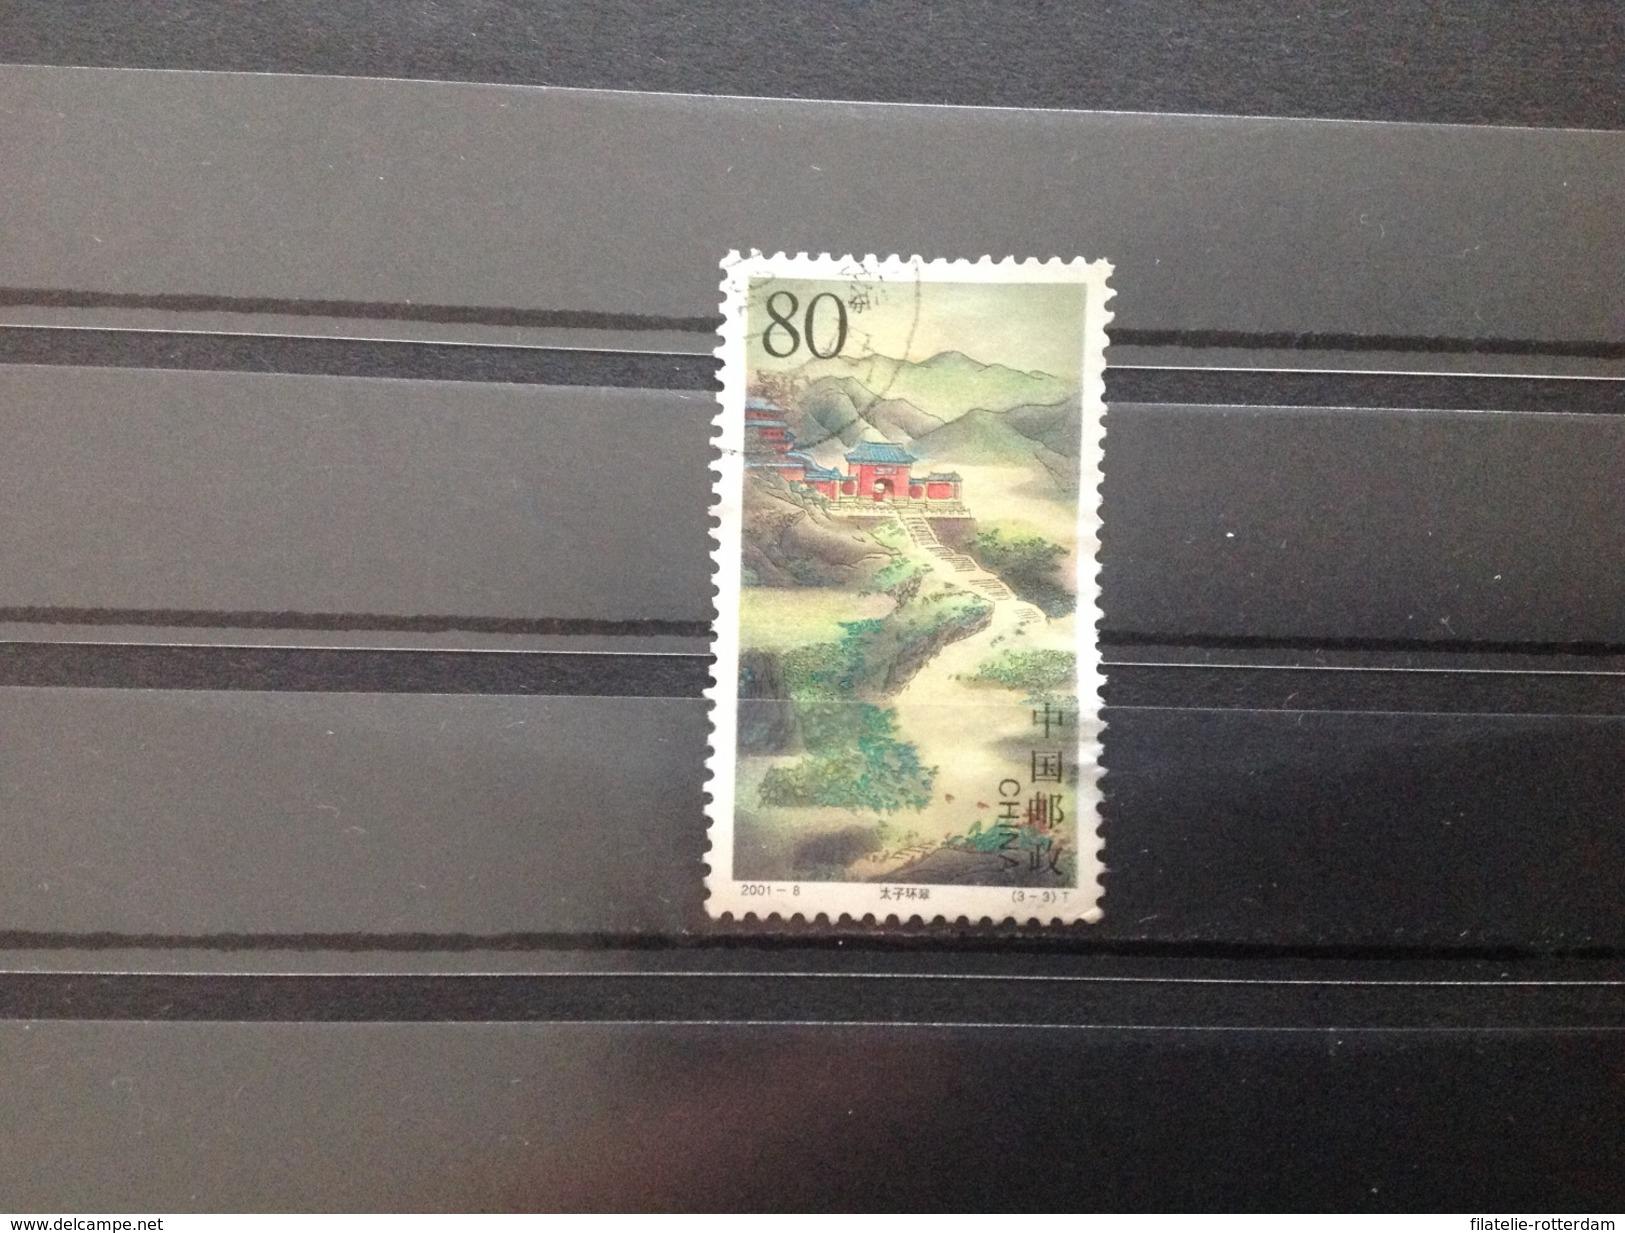 China - Klooster Wudangshan (80) 2001 - Used Stamps